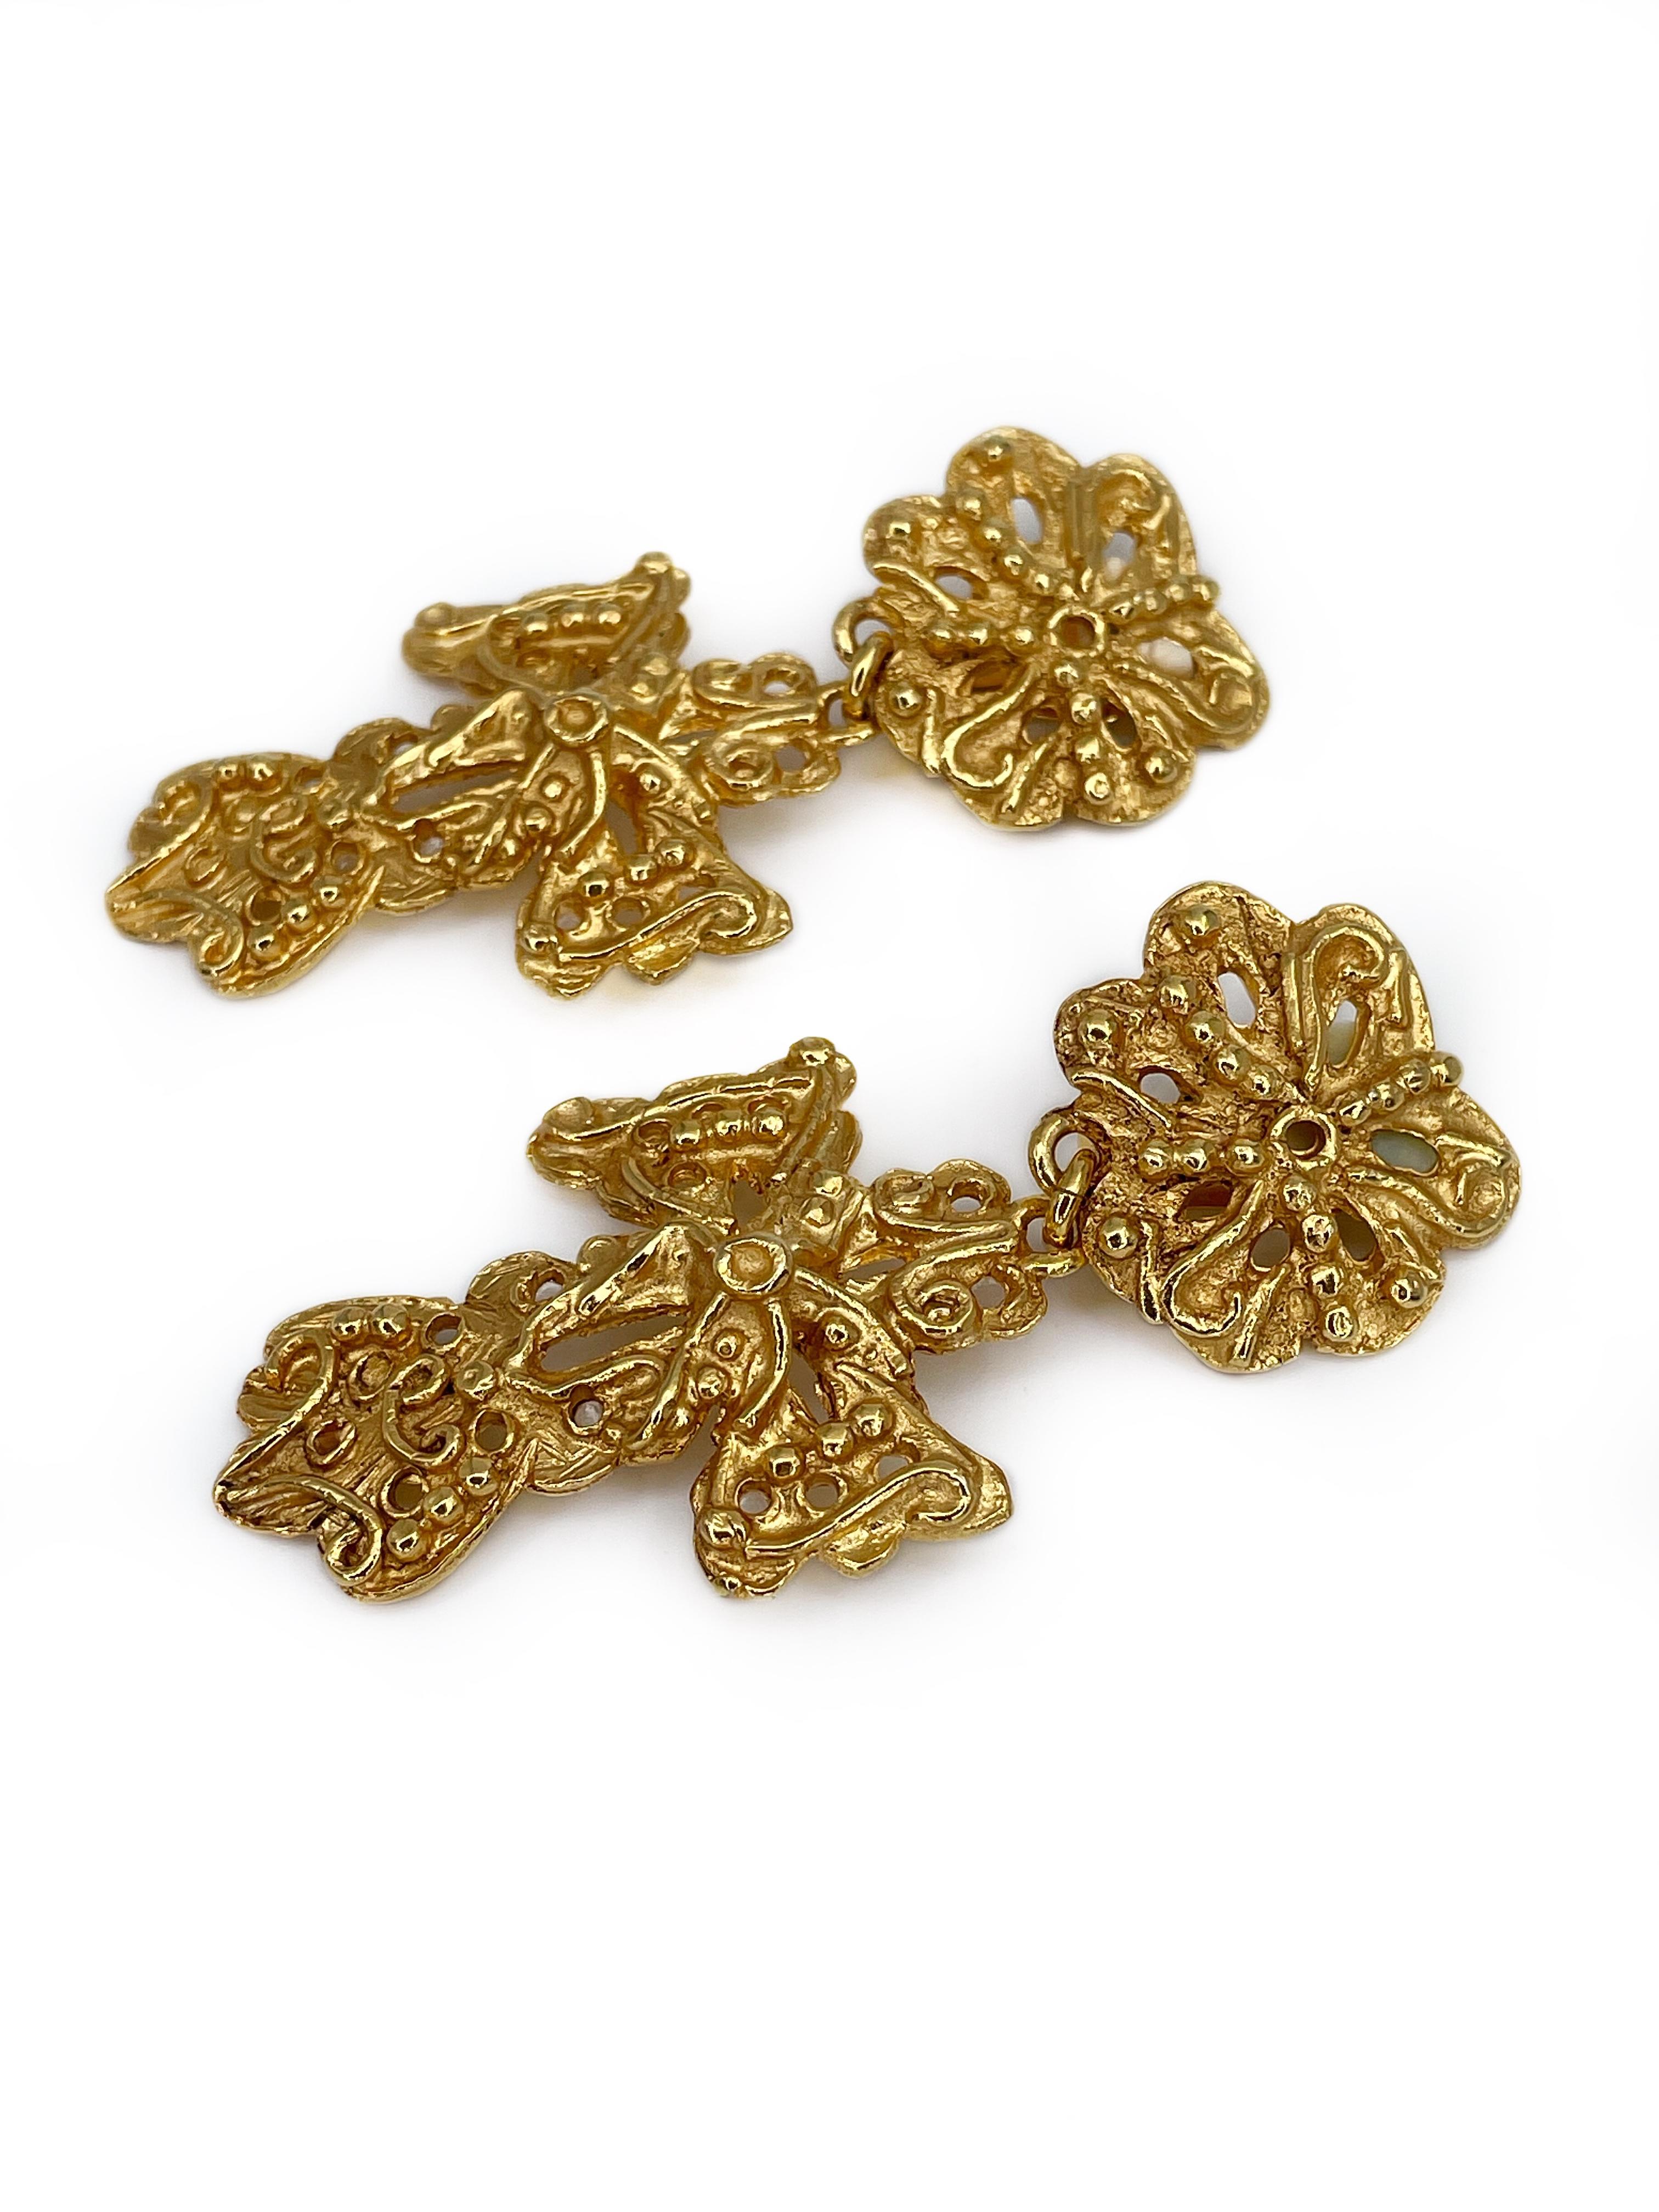 This is an iconic gold tone cross clip on earrings designed by Christian Lacroix. The piece is gold plated, highly decorated. It is made in 1980’s. 

Markings: “Christian Lacroix - CL - Made in France” (shown in photos).

Size: 7x3.2cm